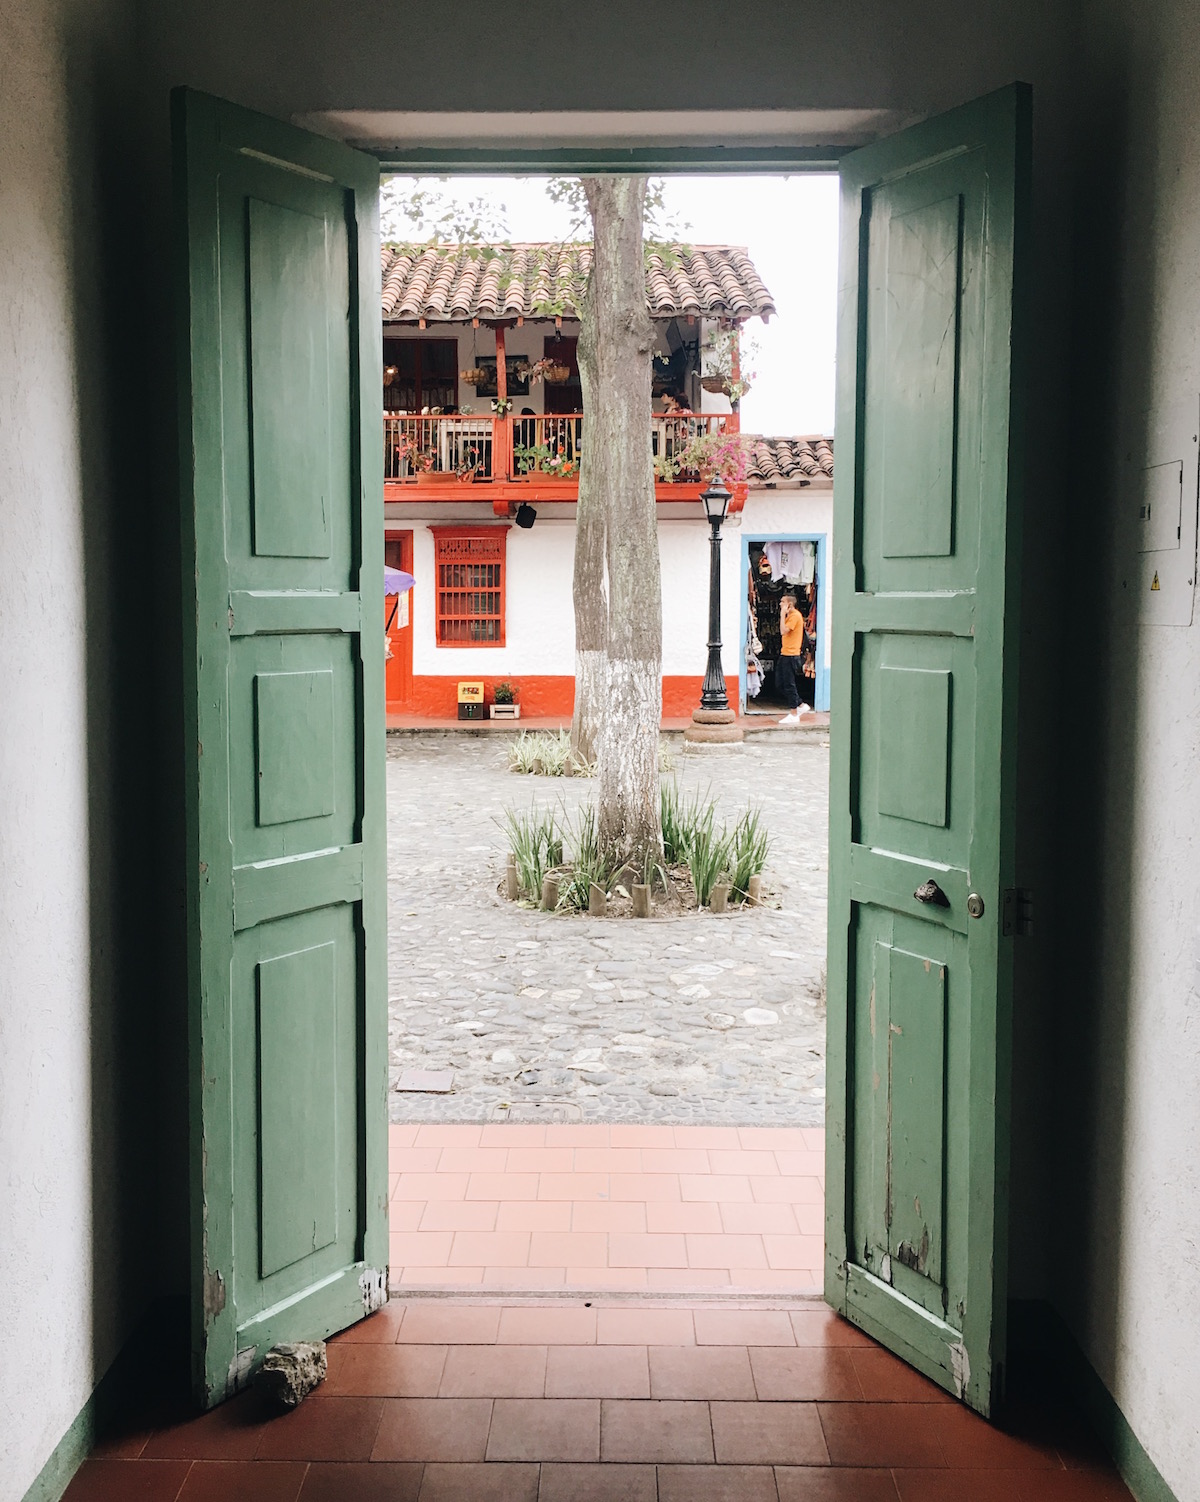  Pueblito Paisa is a recreated town at the top of a hill in the middle of Medellín. One of the best features is the 360-degree view of the whole city from the peak. 